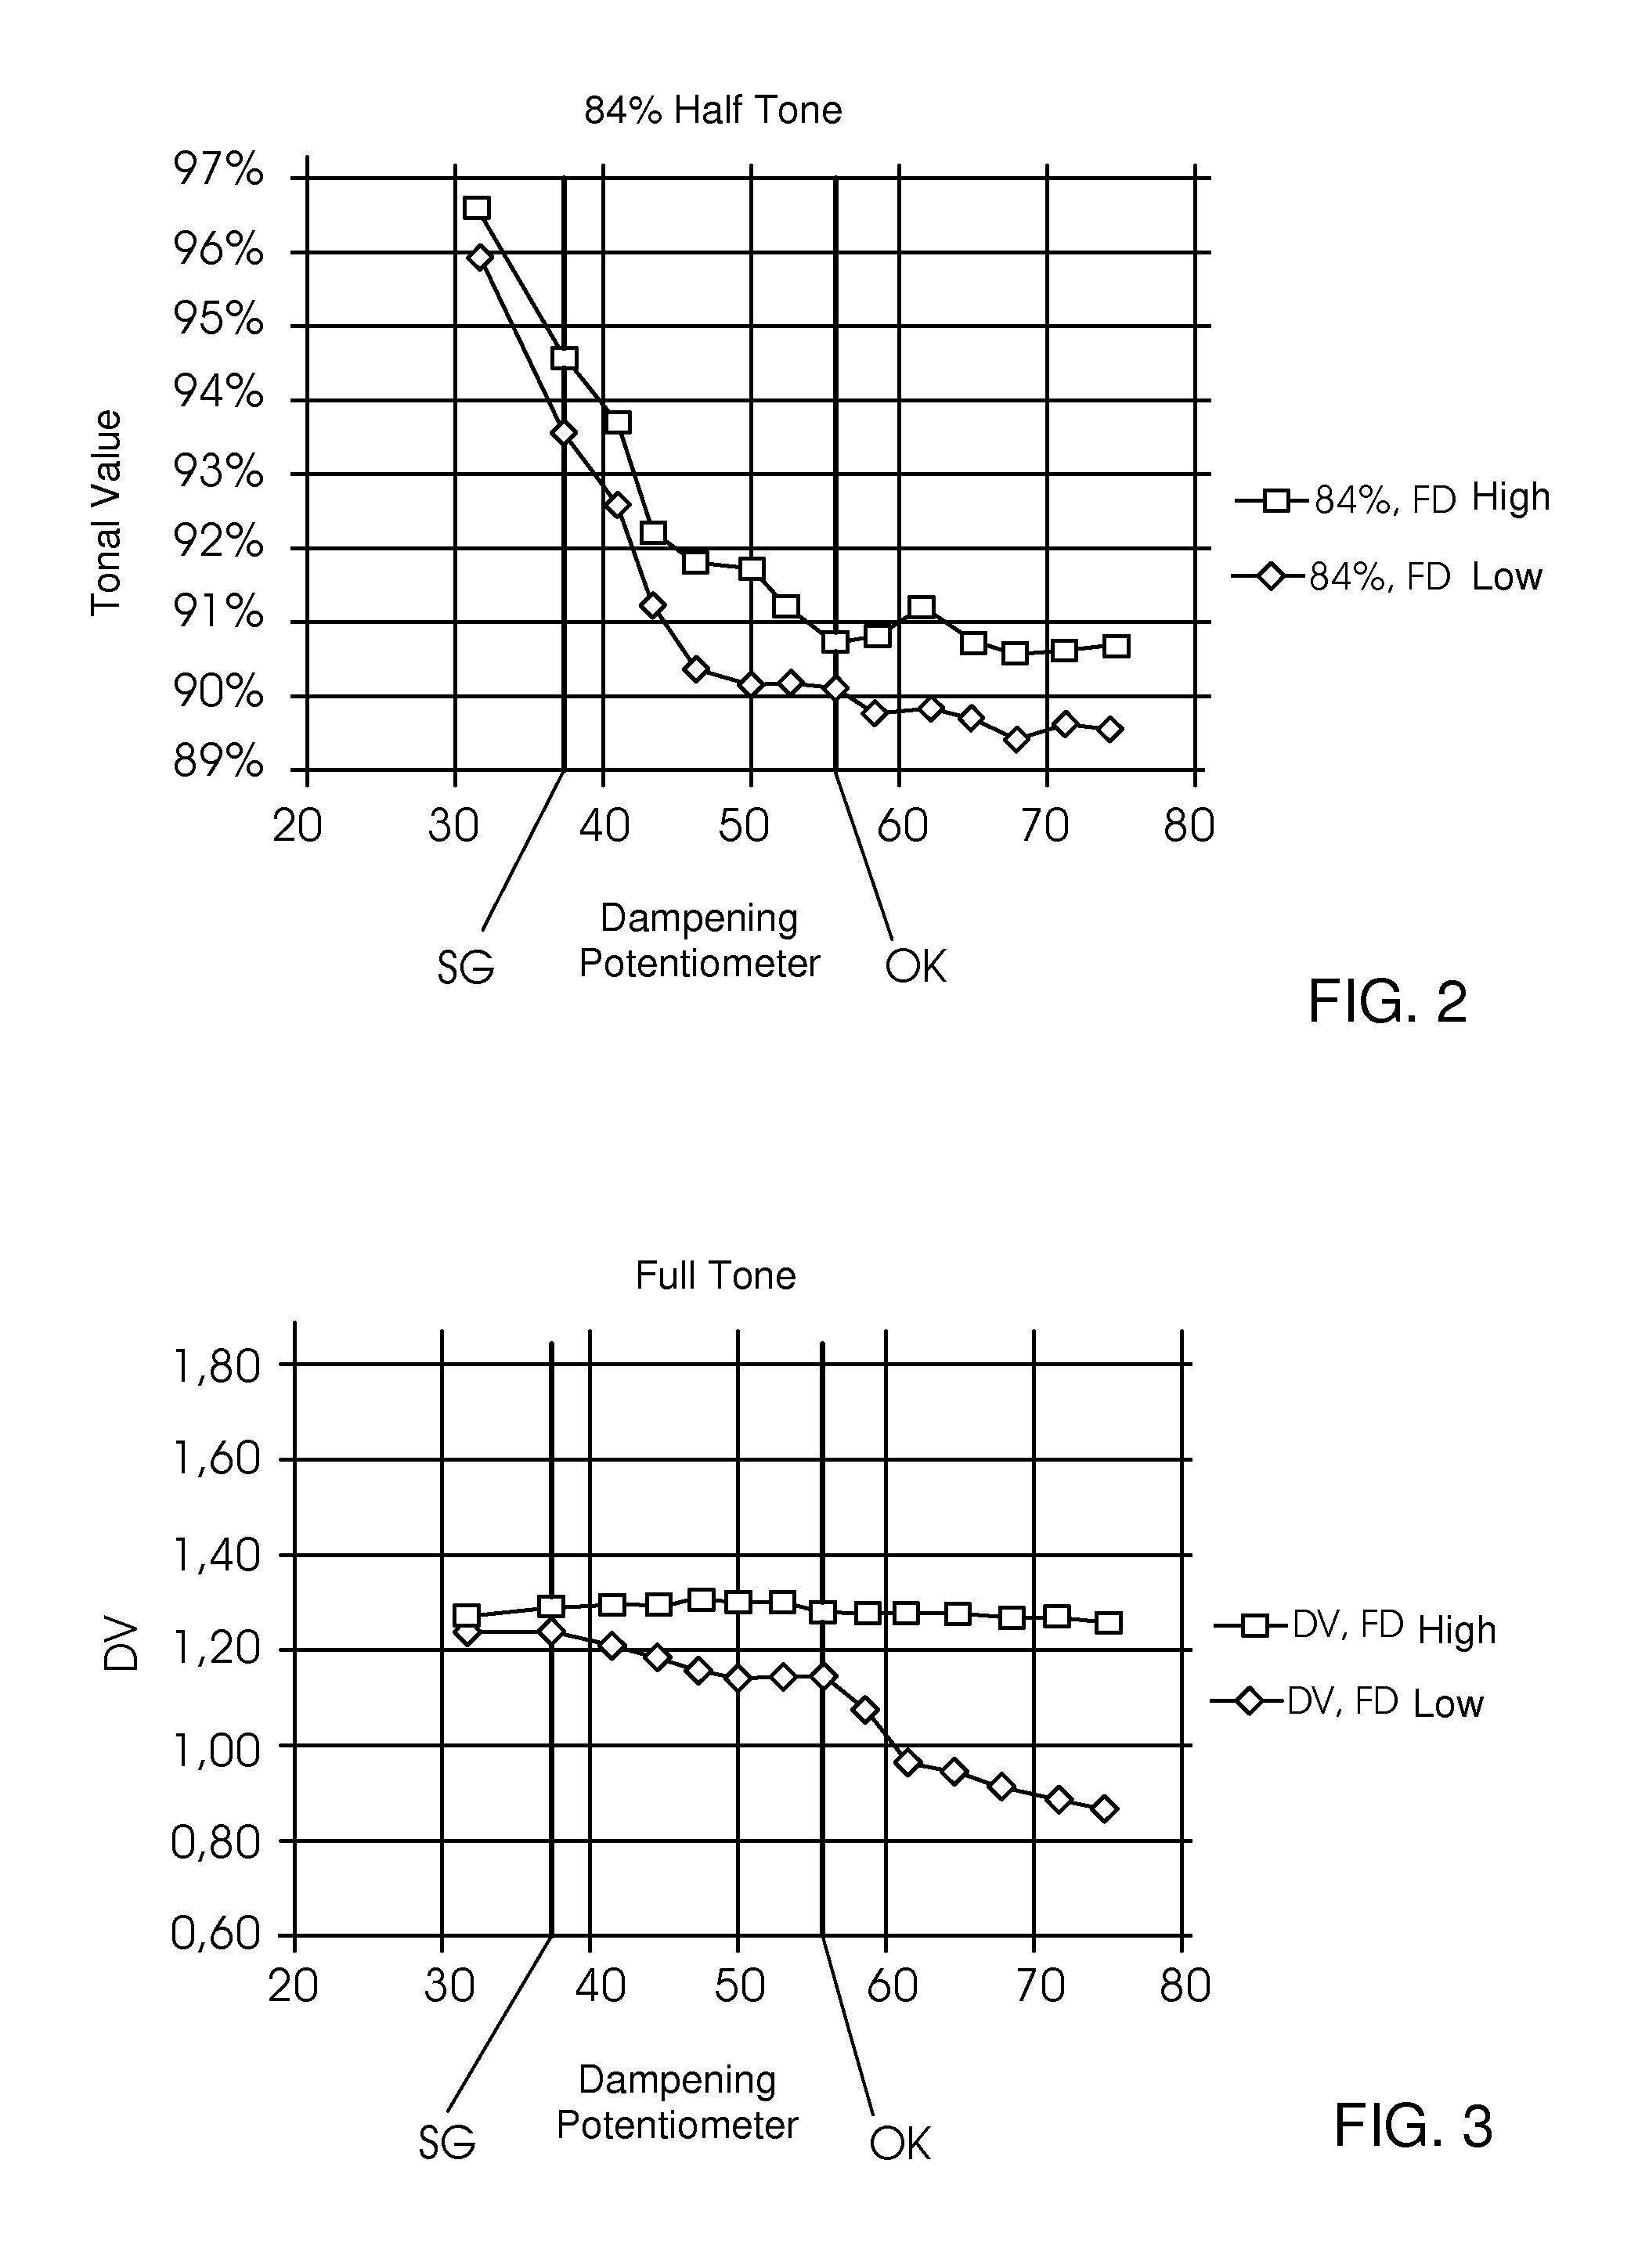 Method for controlling the amount of dampening solution in a printing unit of a printing press